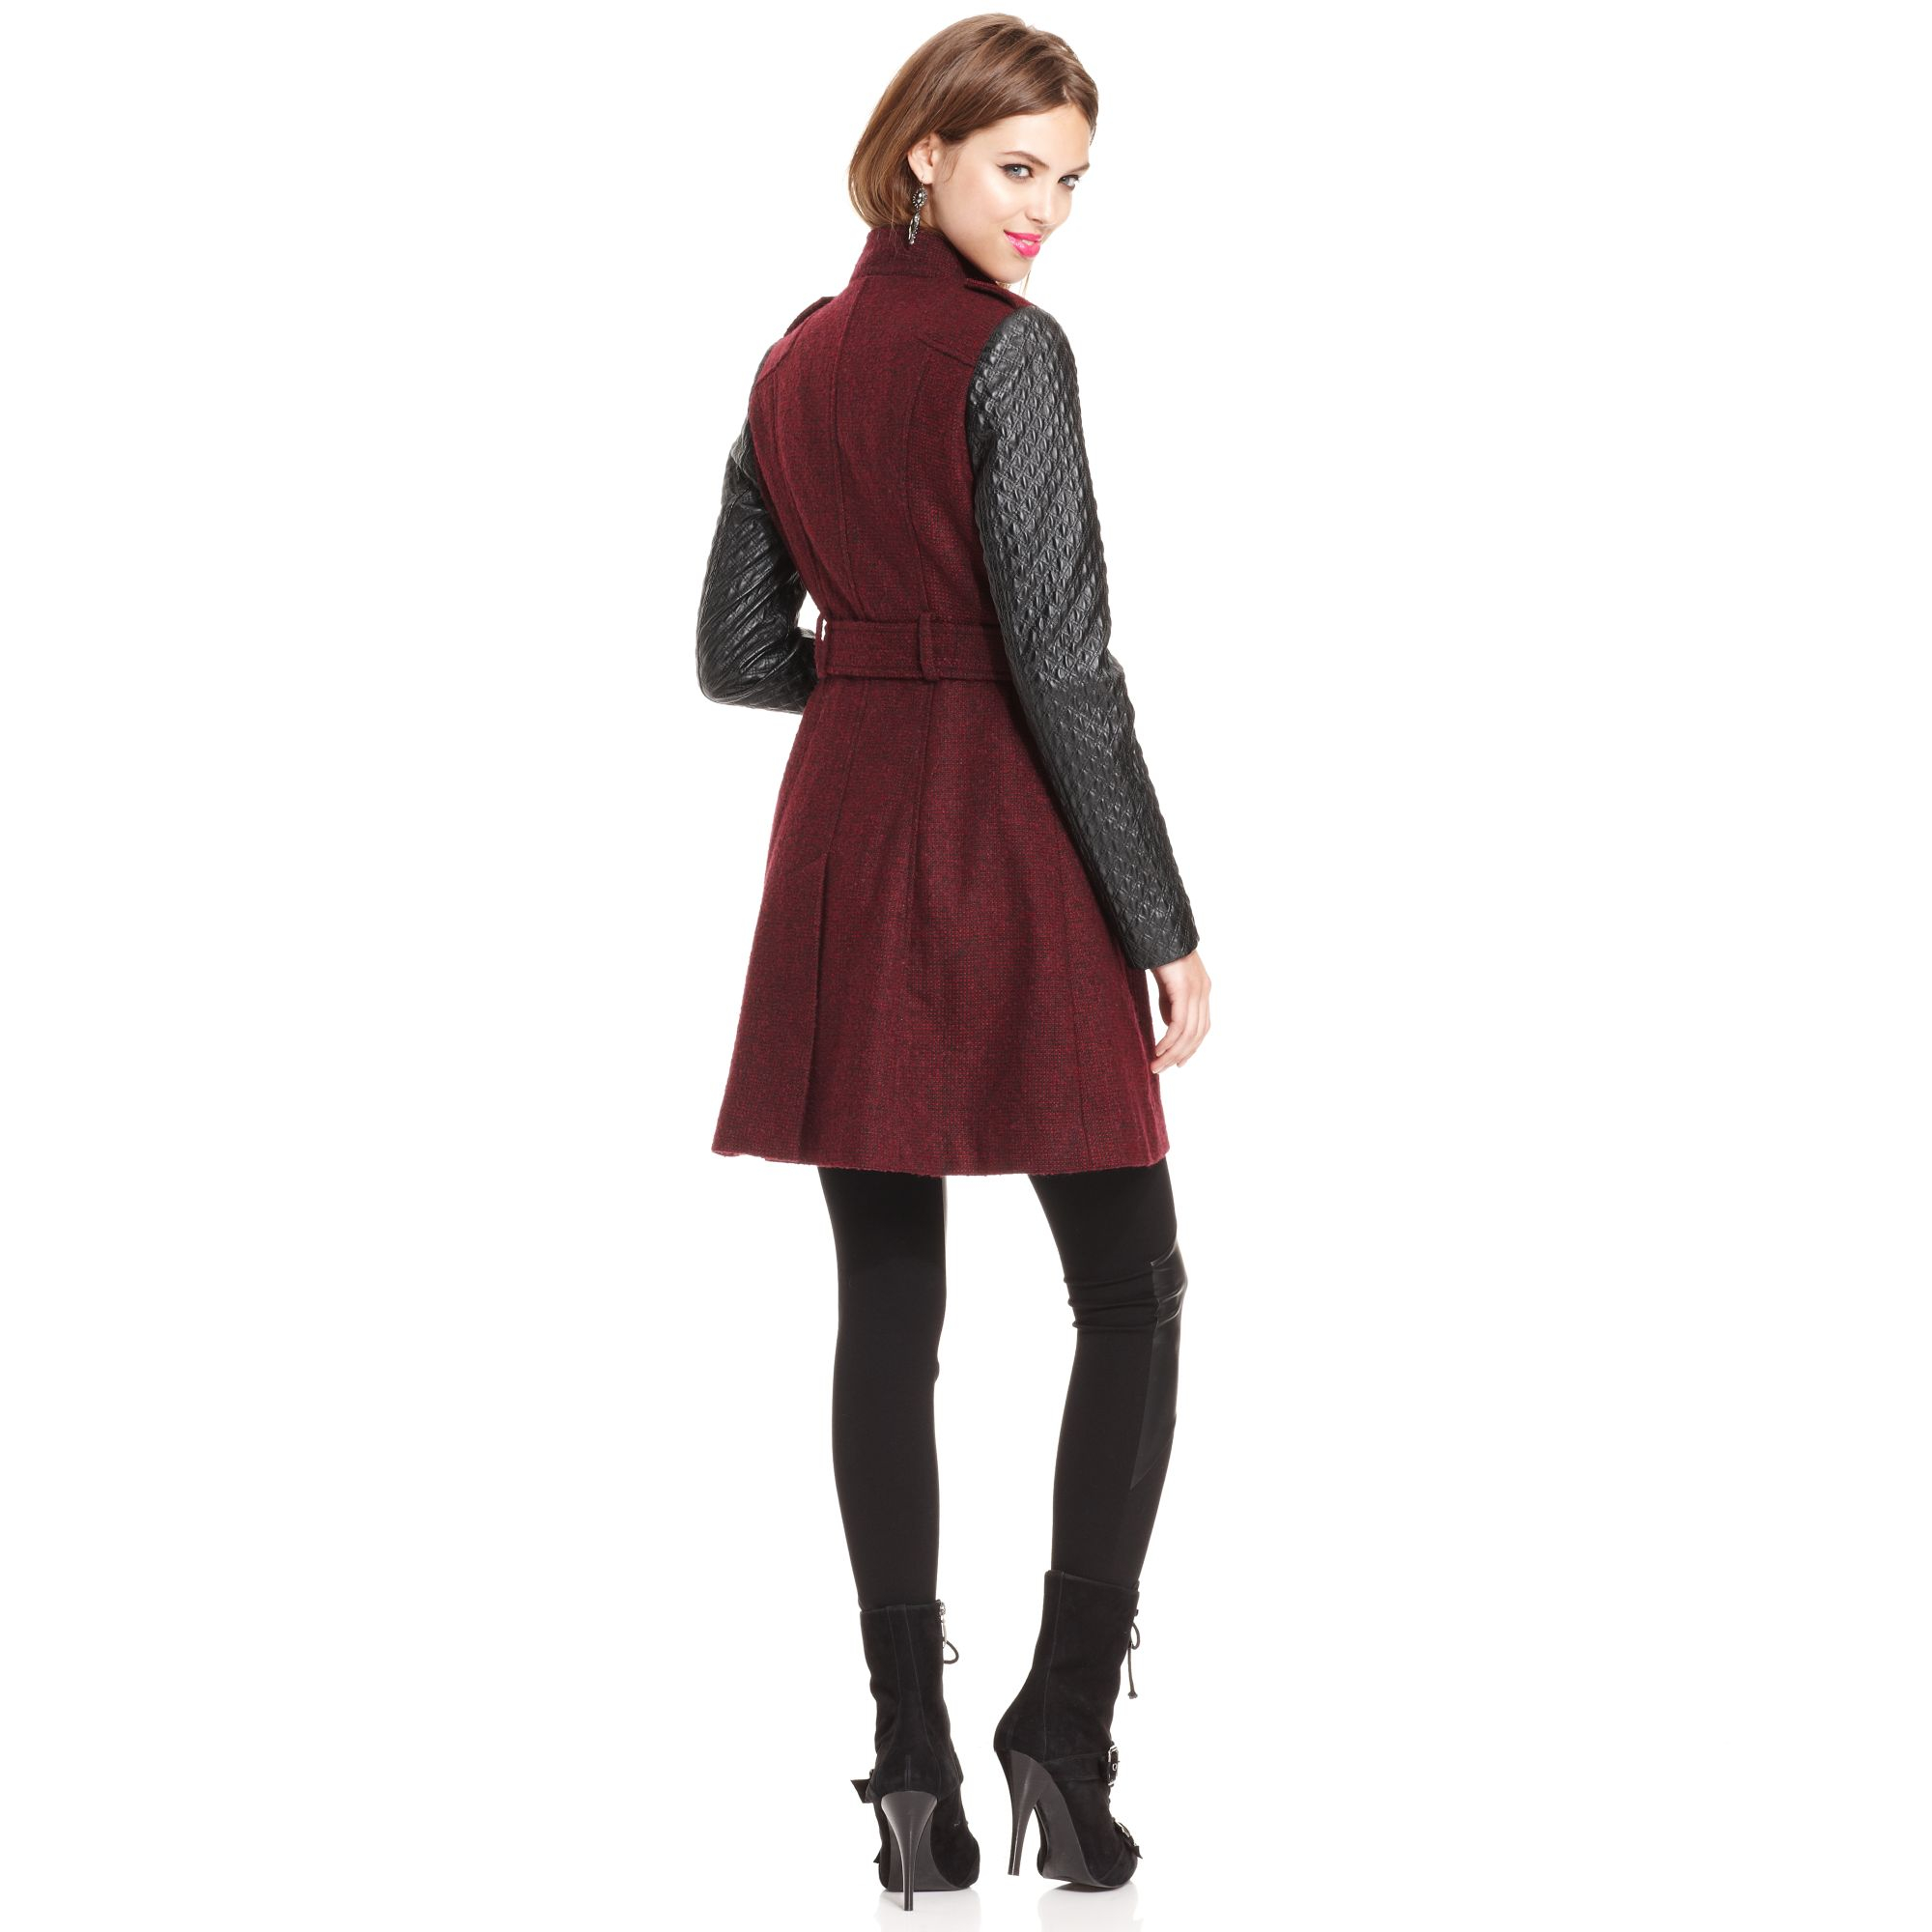 Lyst - Guess Coat Calimesa Fauxleather Trench in Red